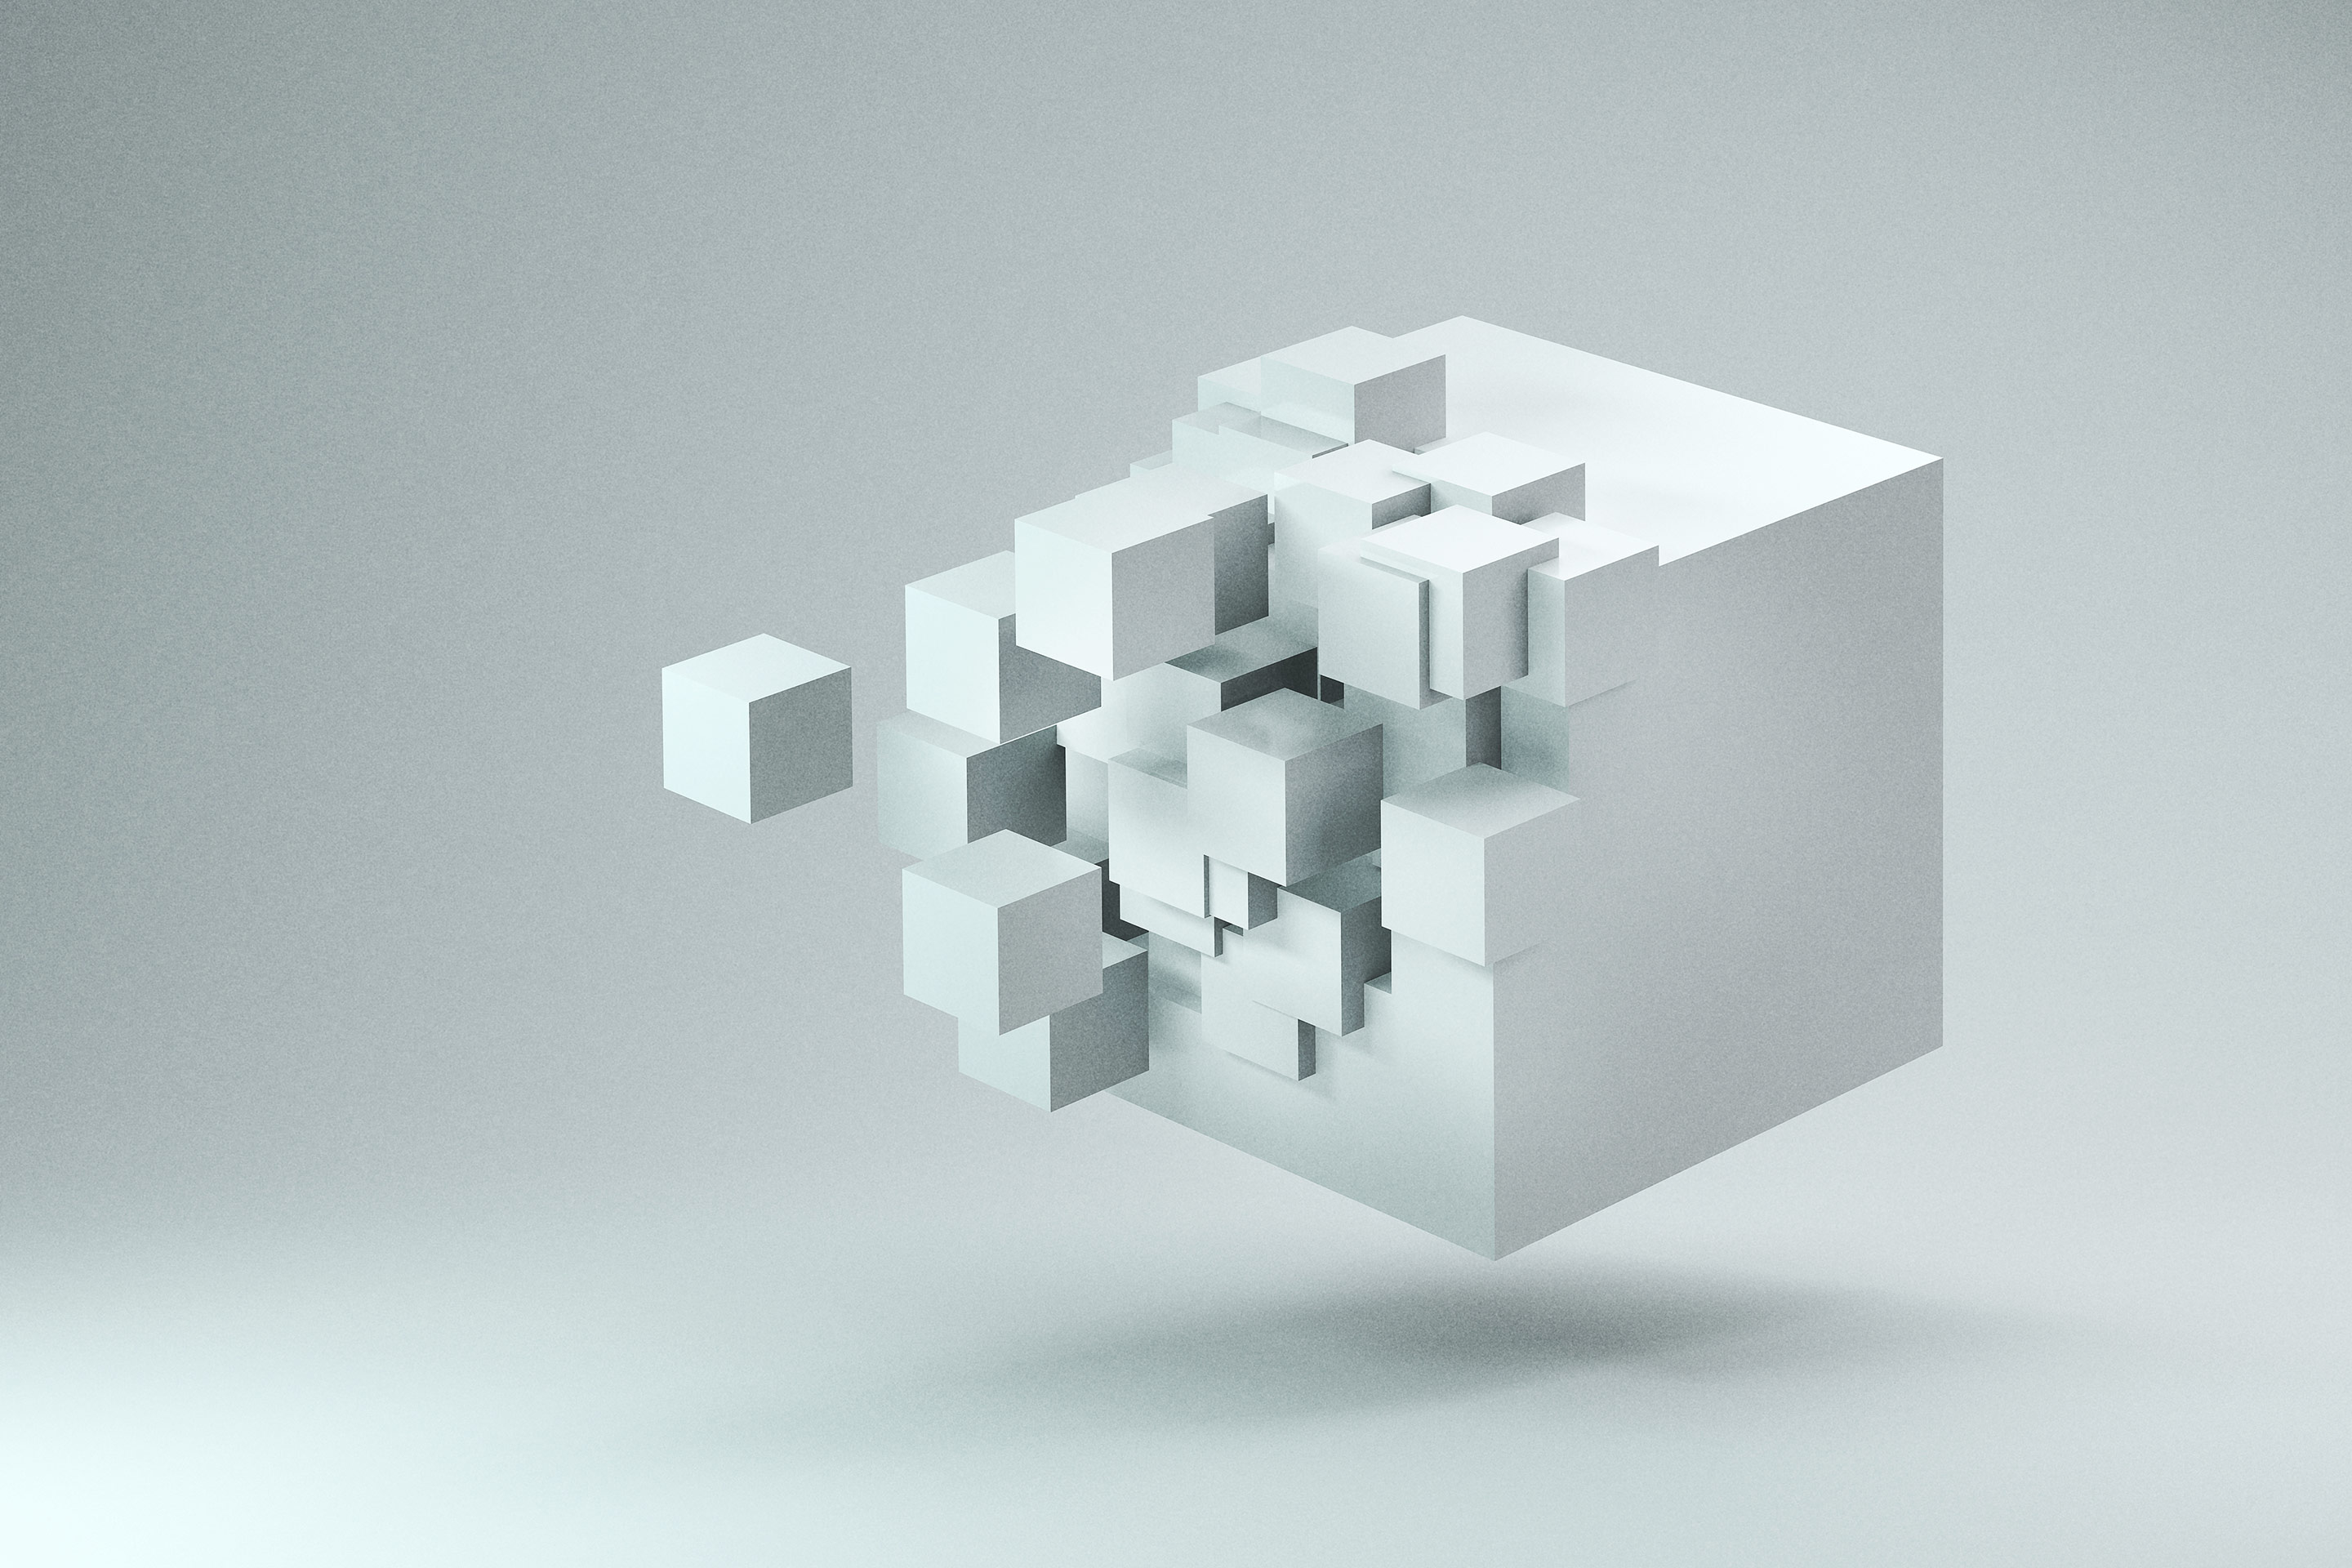 A curious white cube is partially constructed as it floats on a white background. It's either dissolving into smaller white 3D cubes, or being assembled by them.